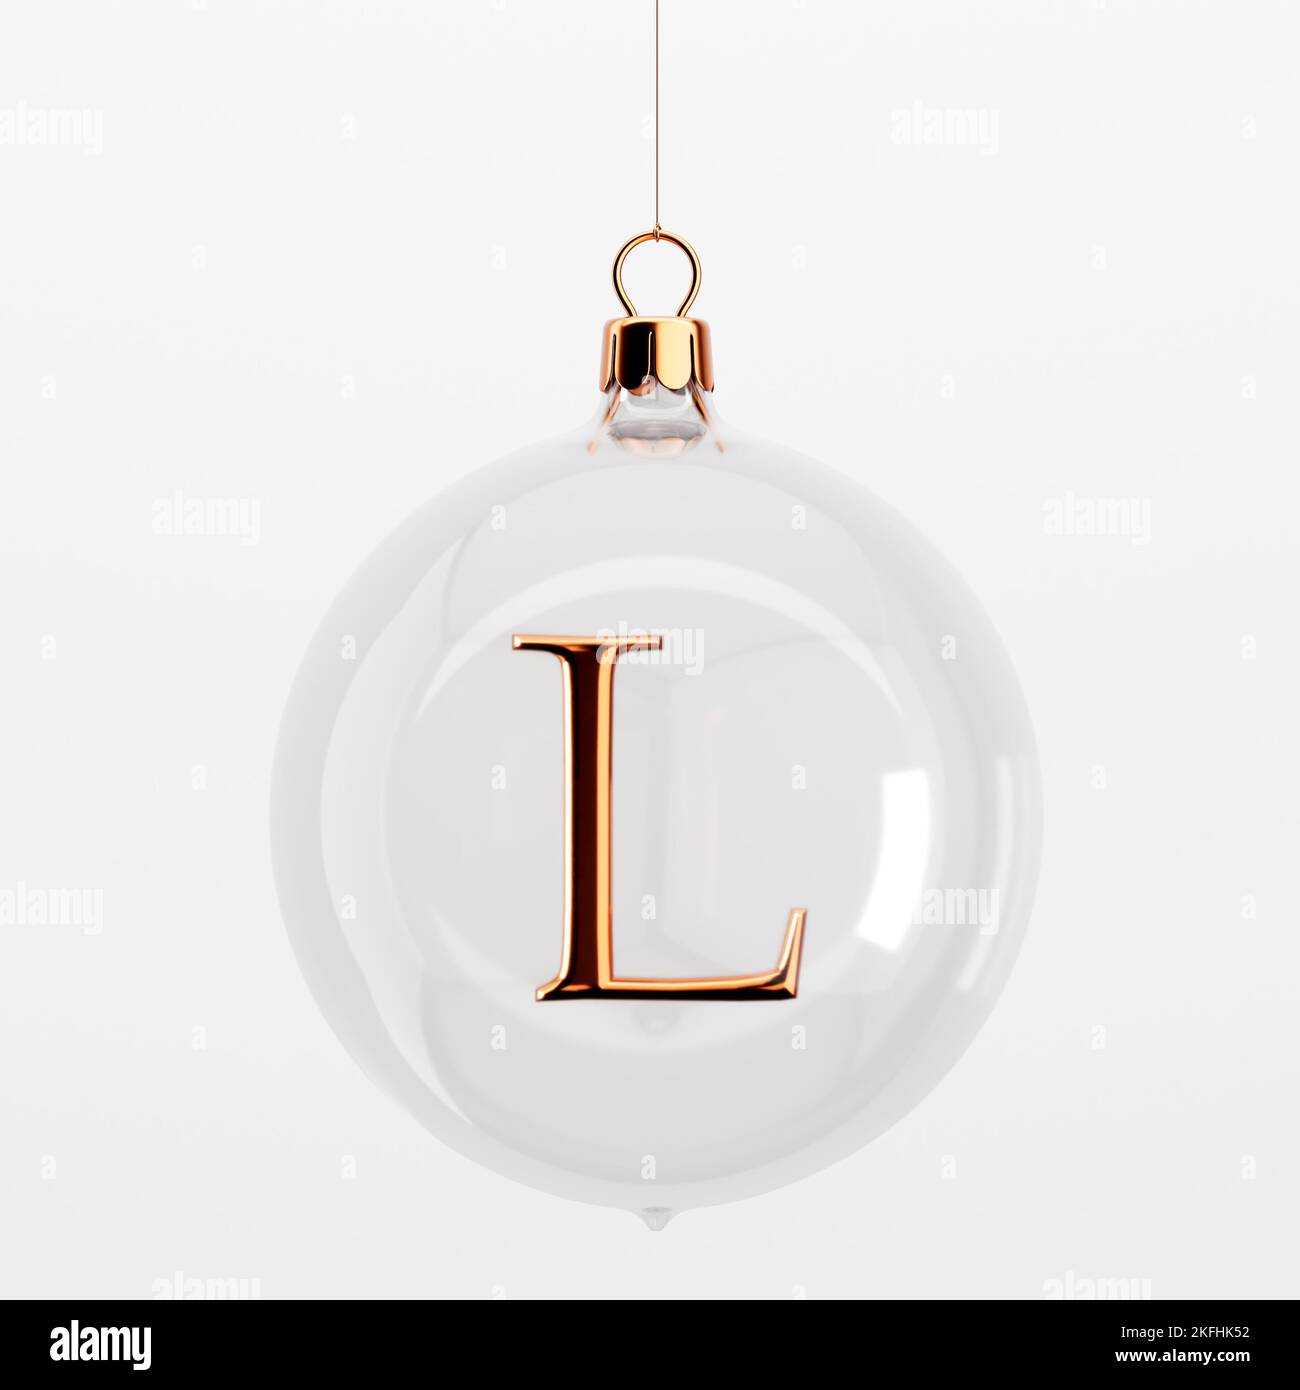 Christmas Alphabet Letter L Stock Photo - Image of flora, isolated: 16639914